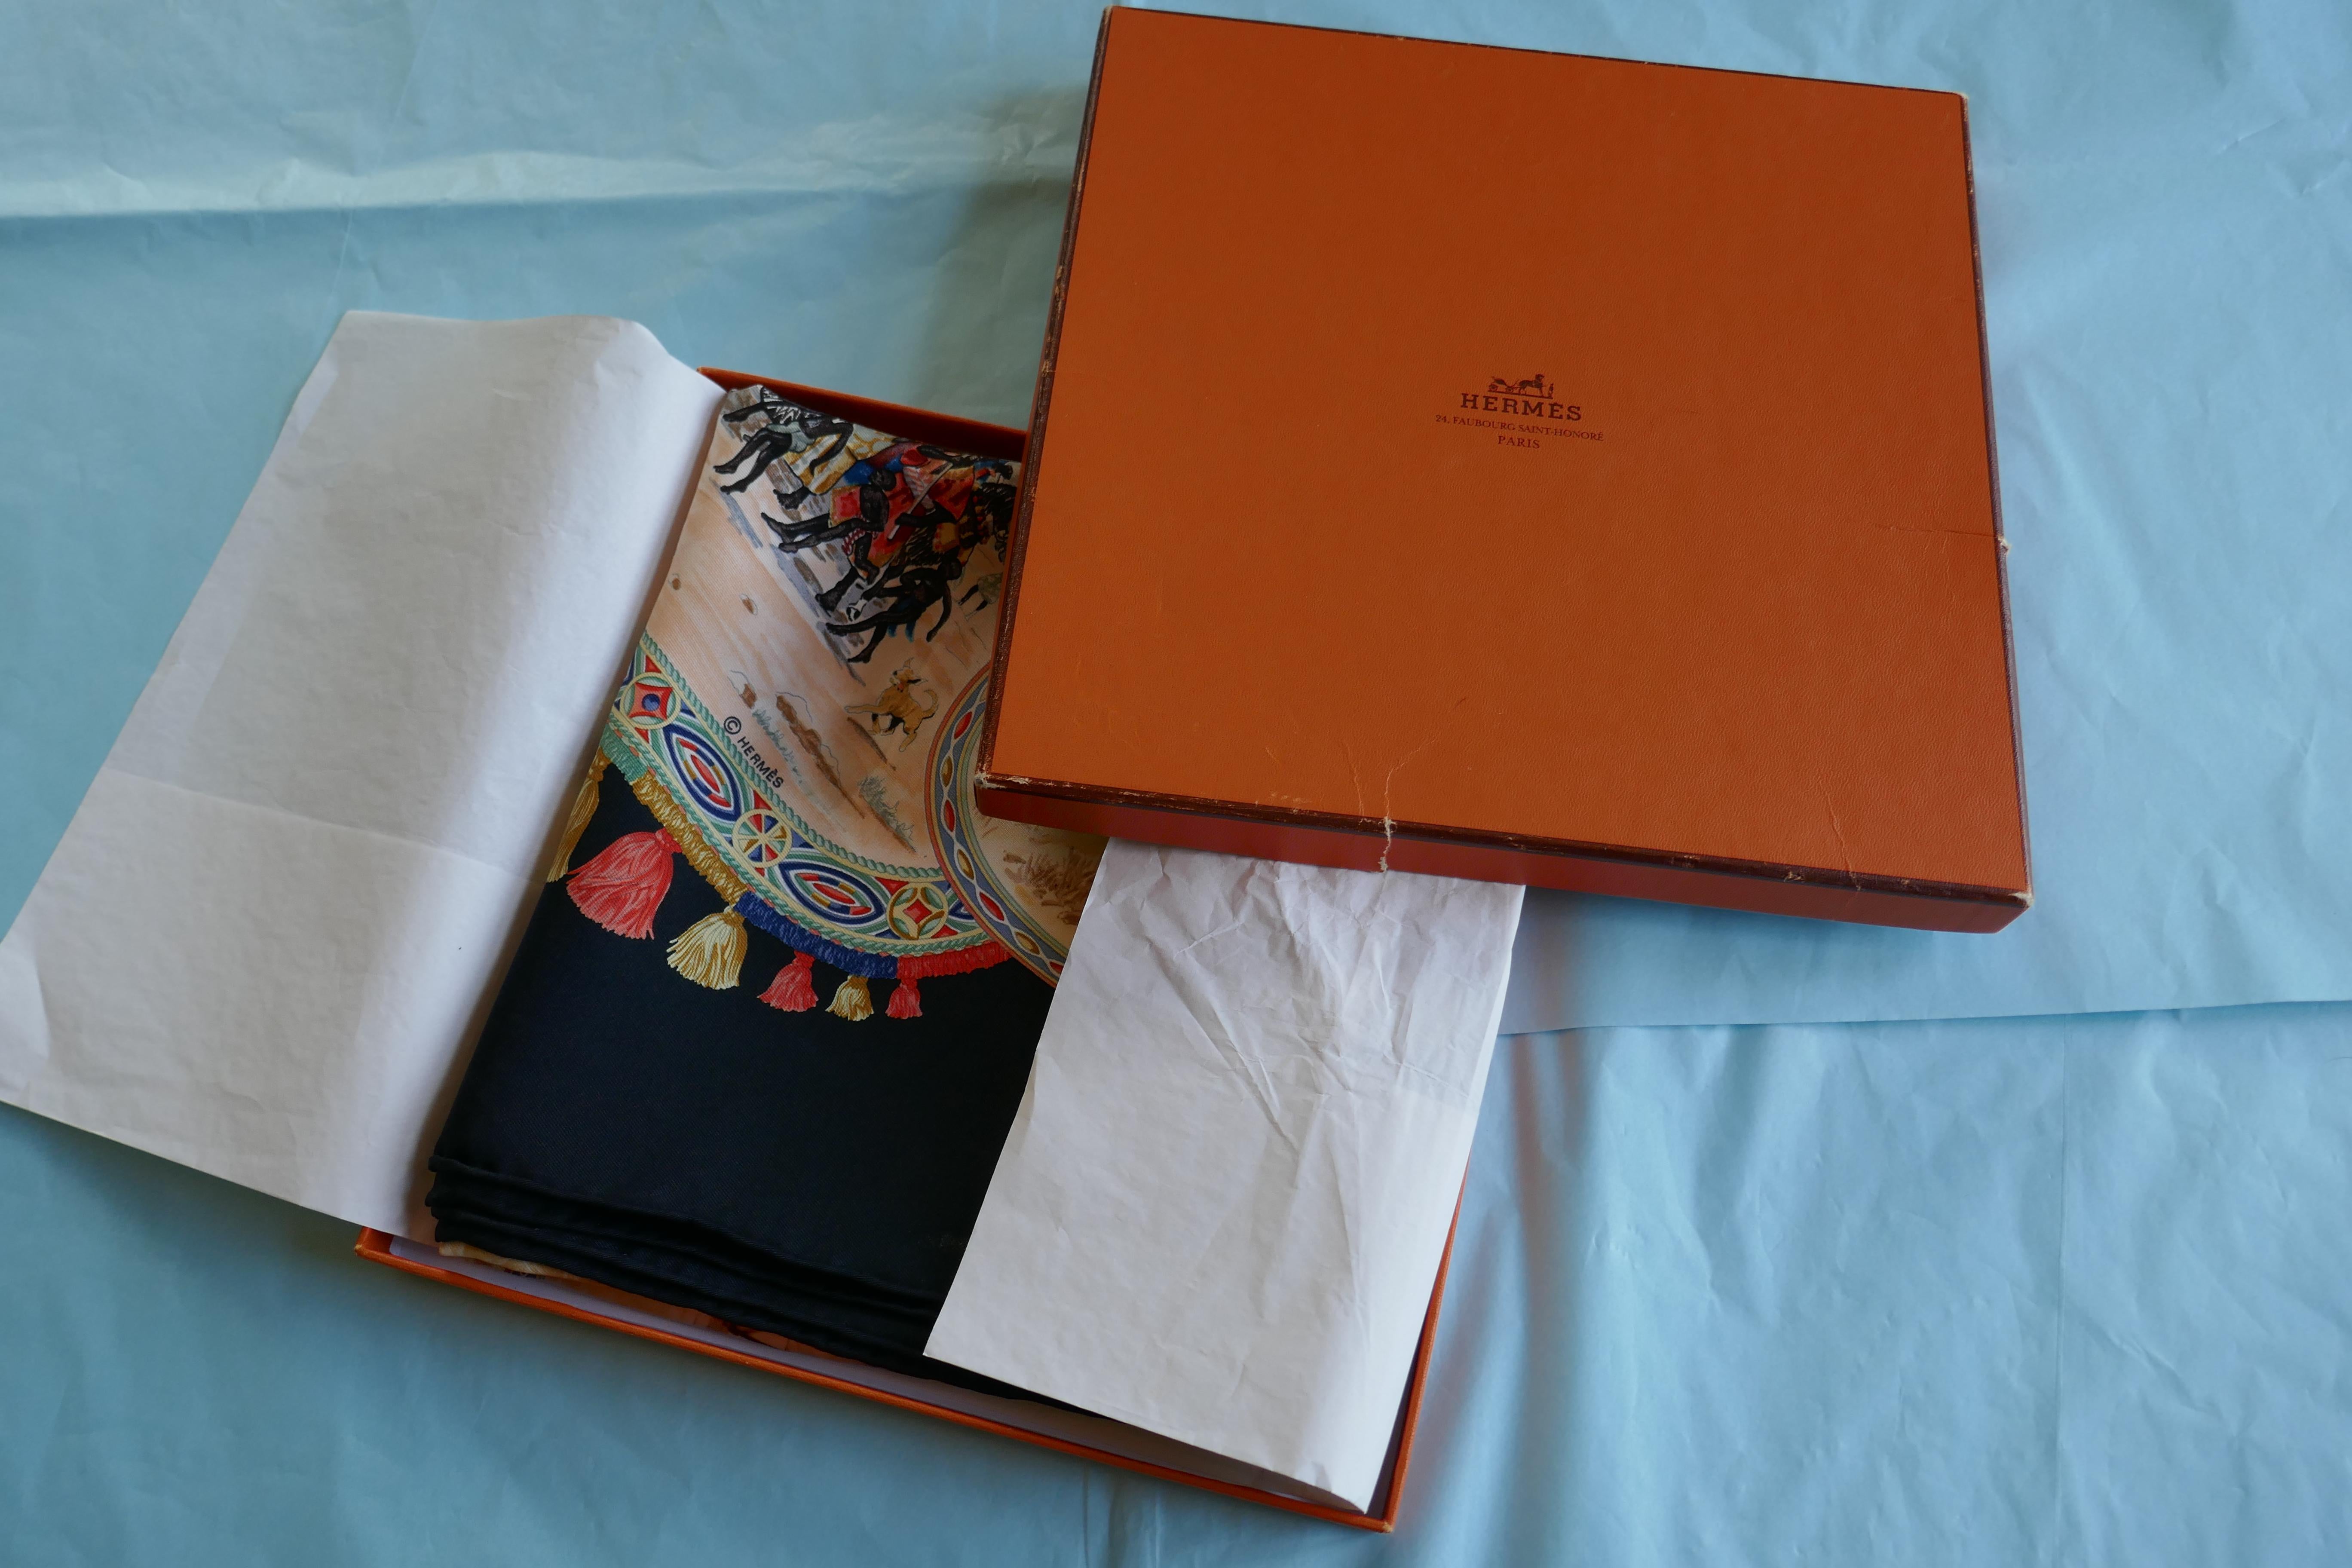 HERMÈS Silk Scarf, Jean de Fougerolle design “Chevalliers Peuls” in Black

In unworn condition, this scarf has been stored in folds for some years
Signature and the Hermes Logo hidden into the design byJean de Fougeroll
The scarf is in Black with